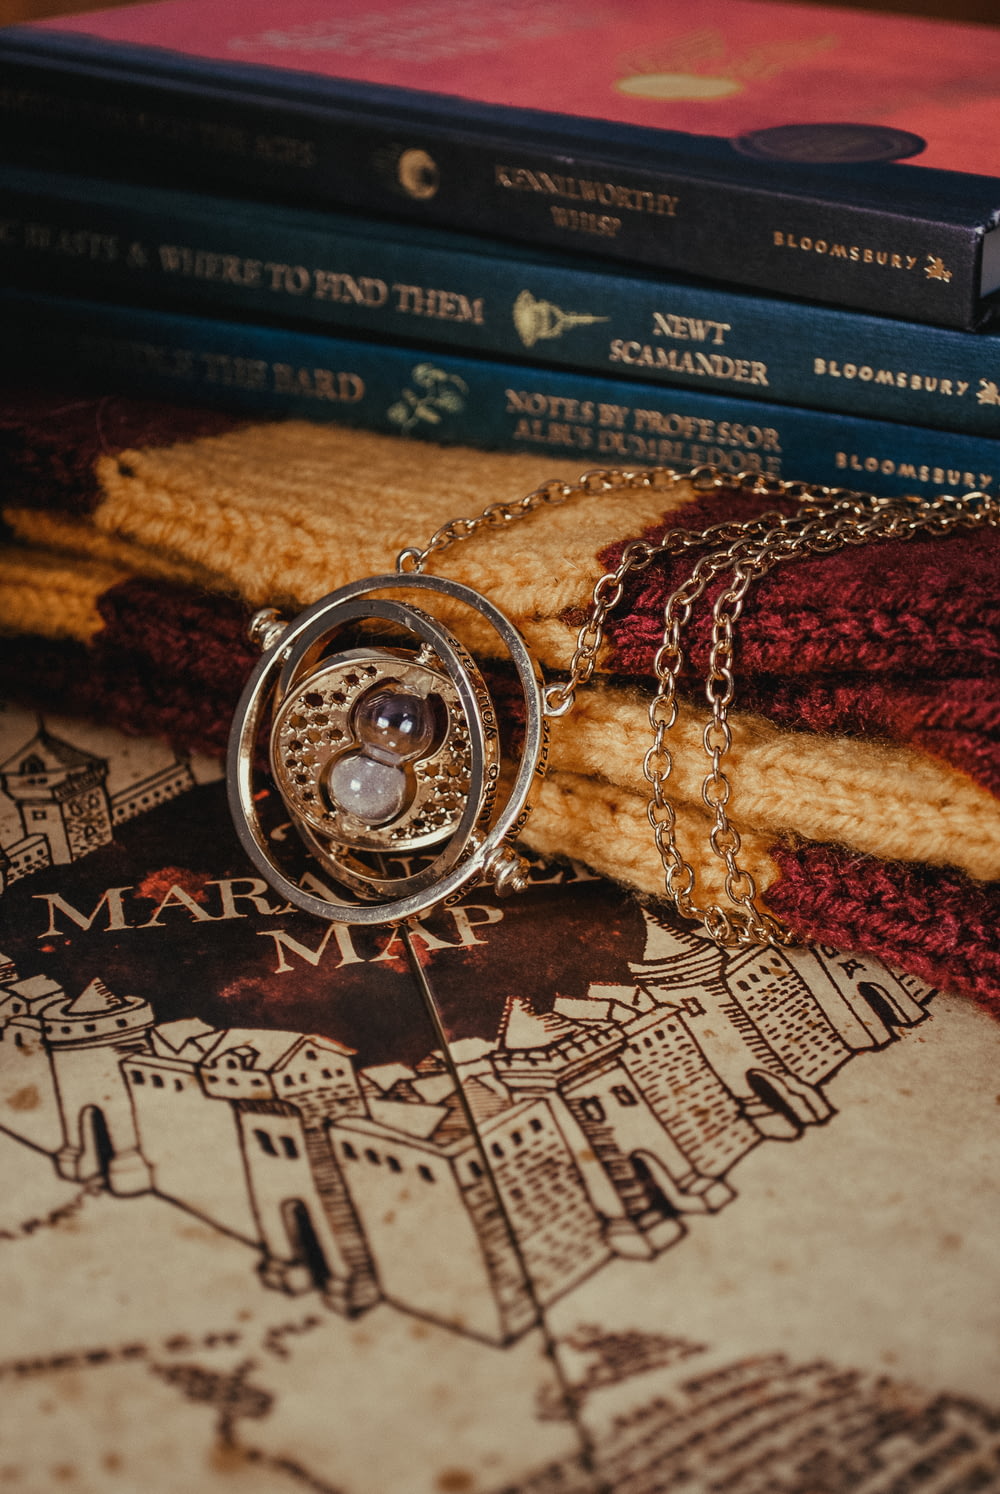 a close up of a necklace on a book